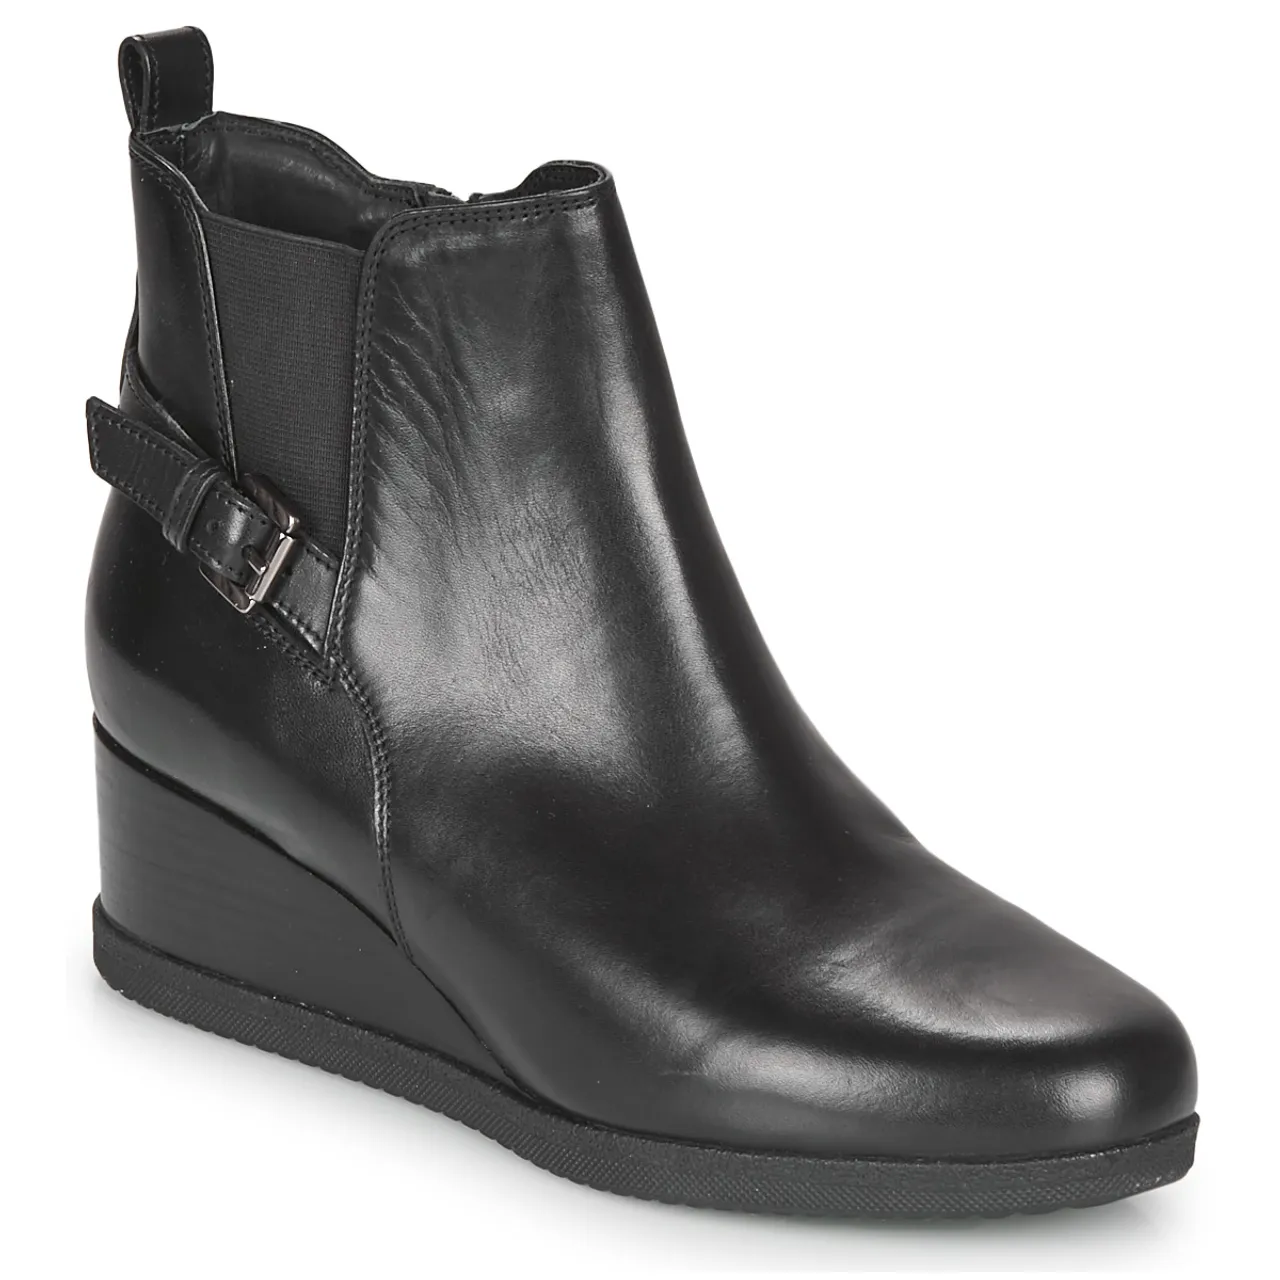 Geox  ANYLLA WEDGE  women's Low Ankle Boots in Black